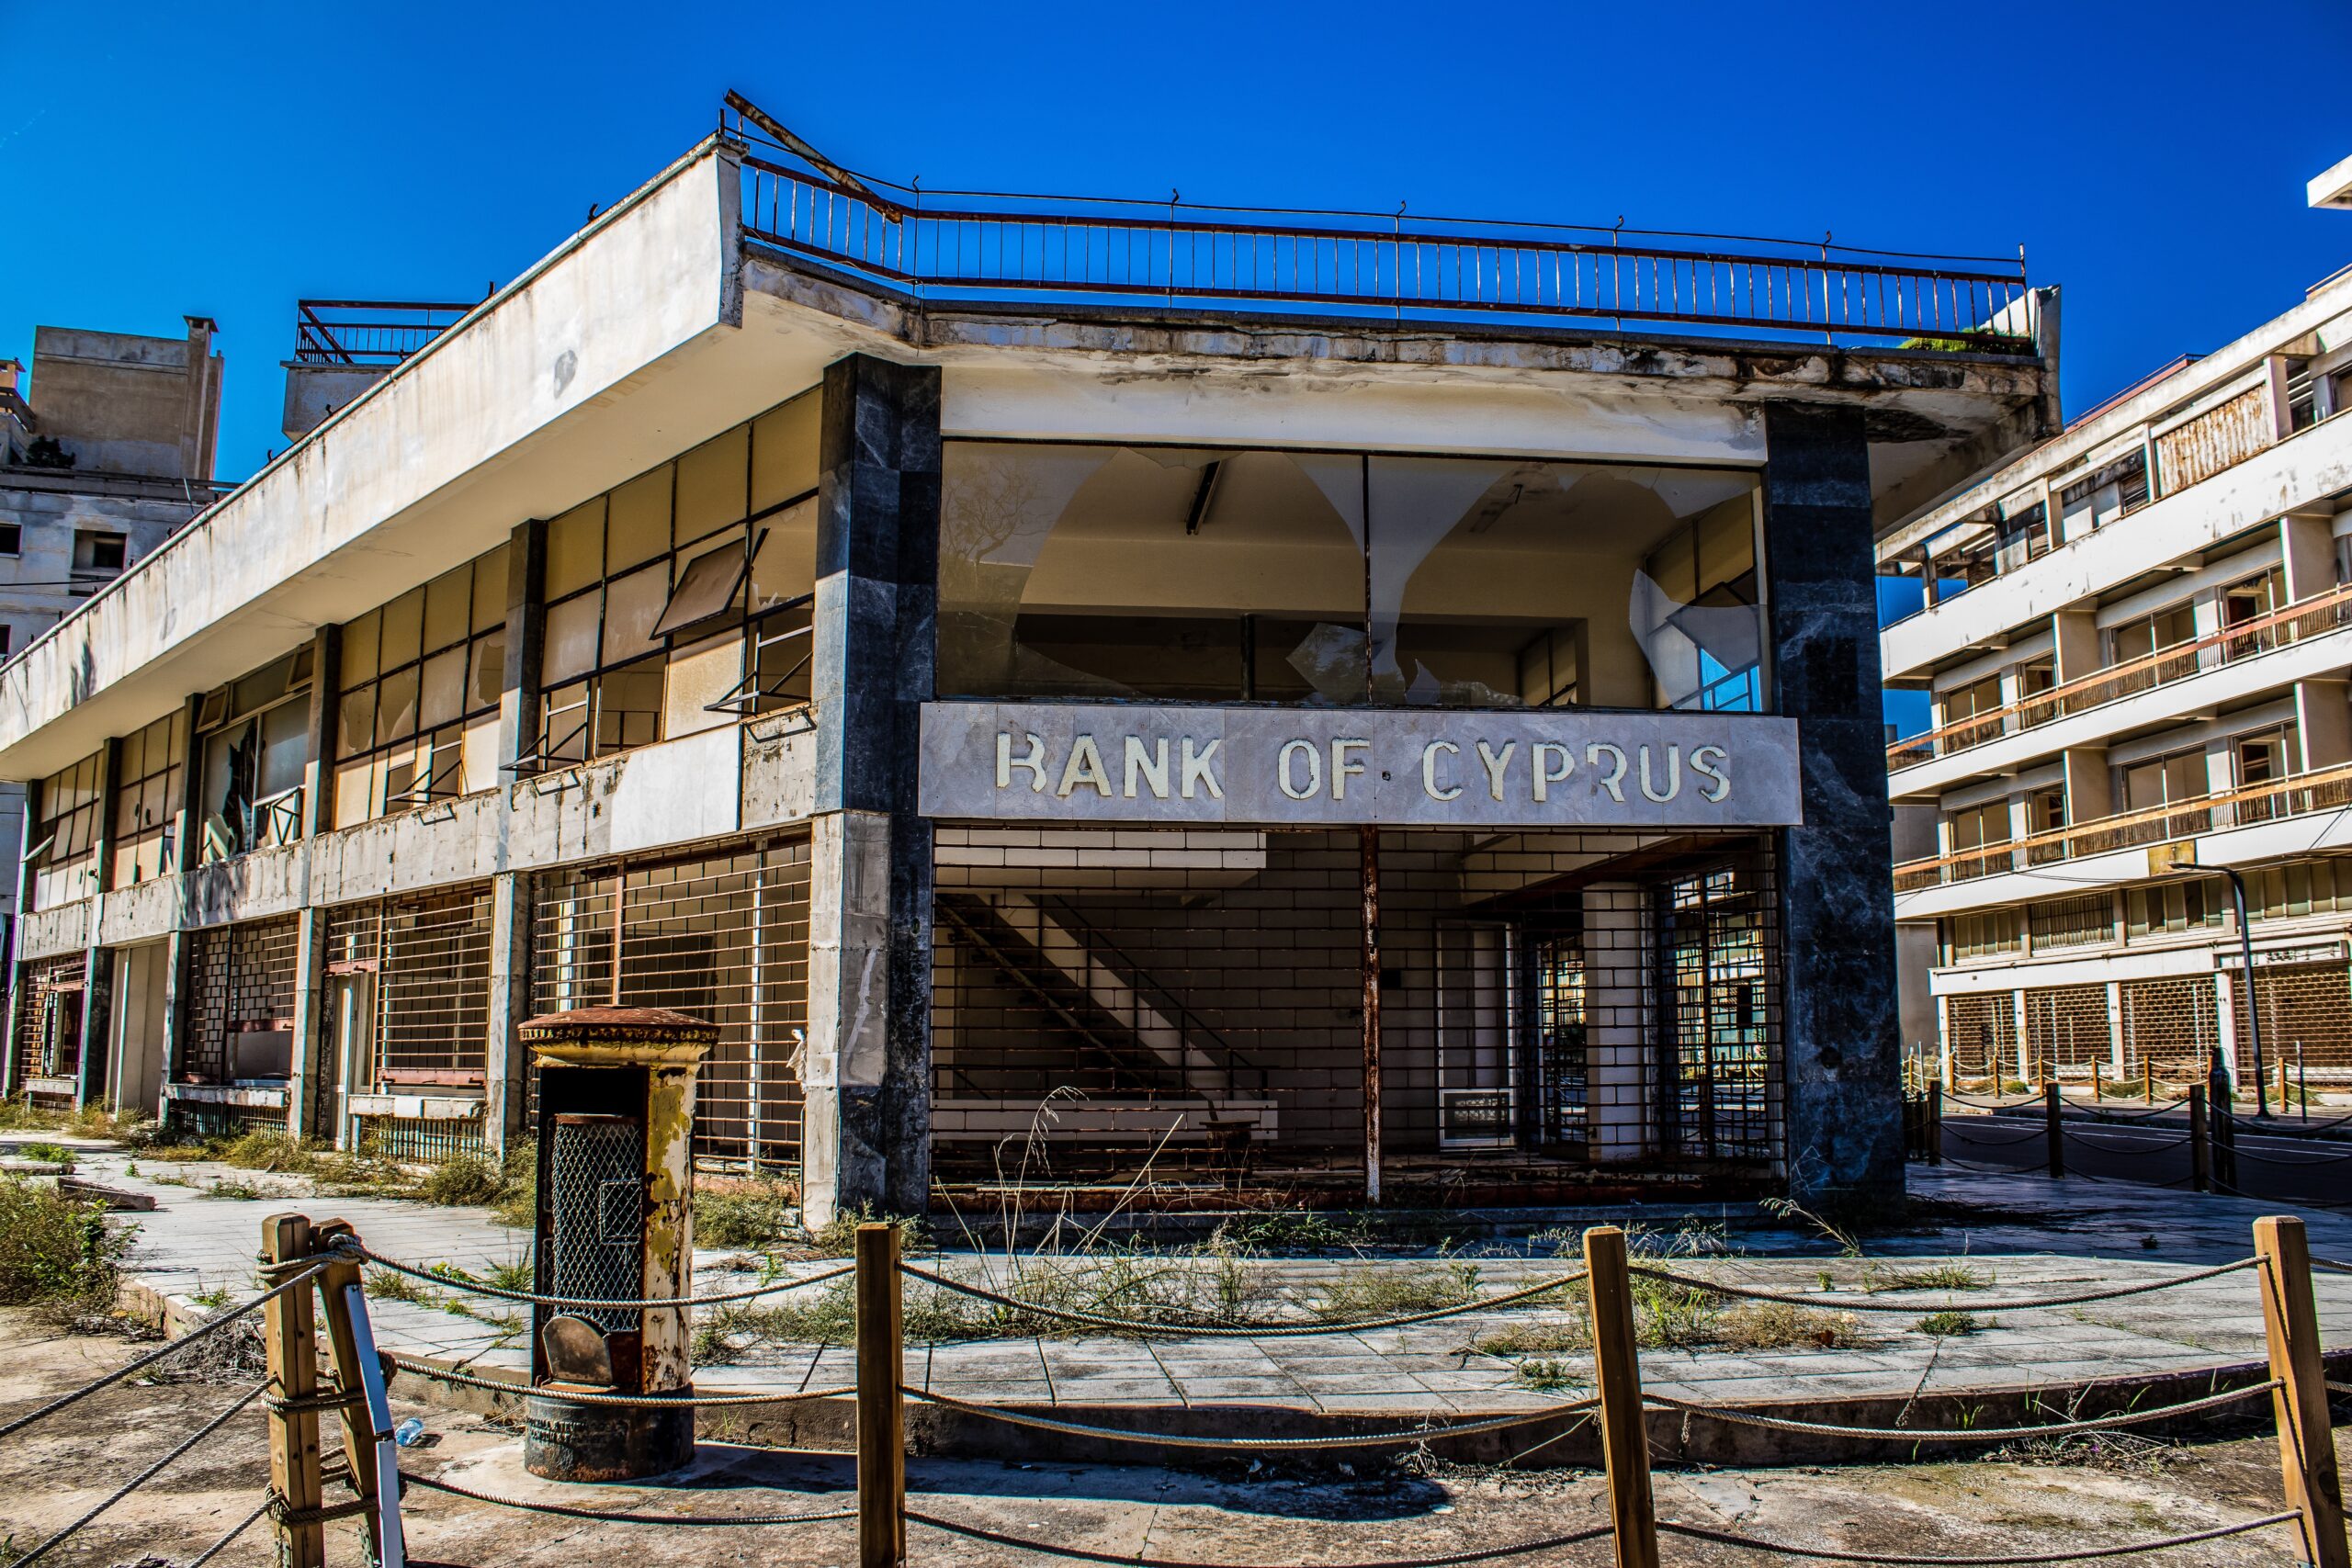 Abandoned Bank of Cyprus building in Varosha, a deserted seaside resort impacted by the 1974 Turkish military intervention.